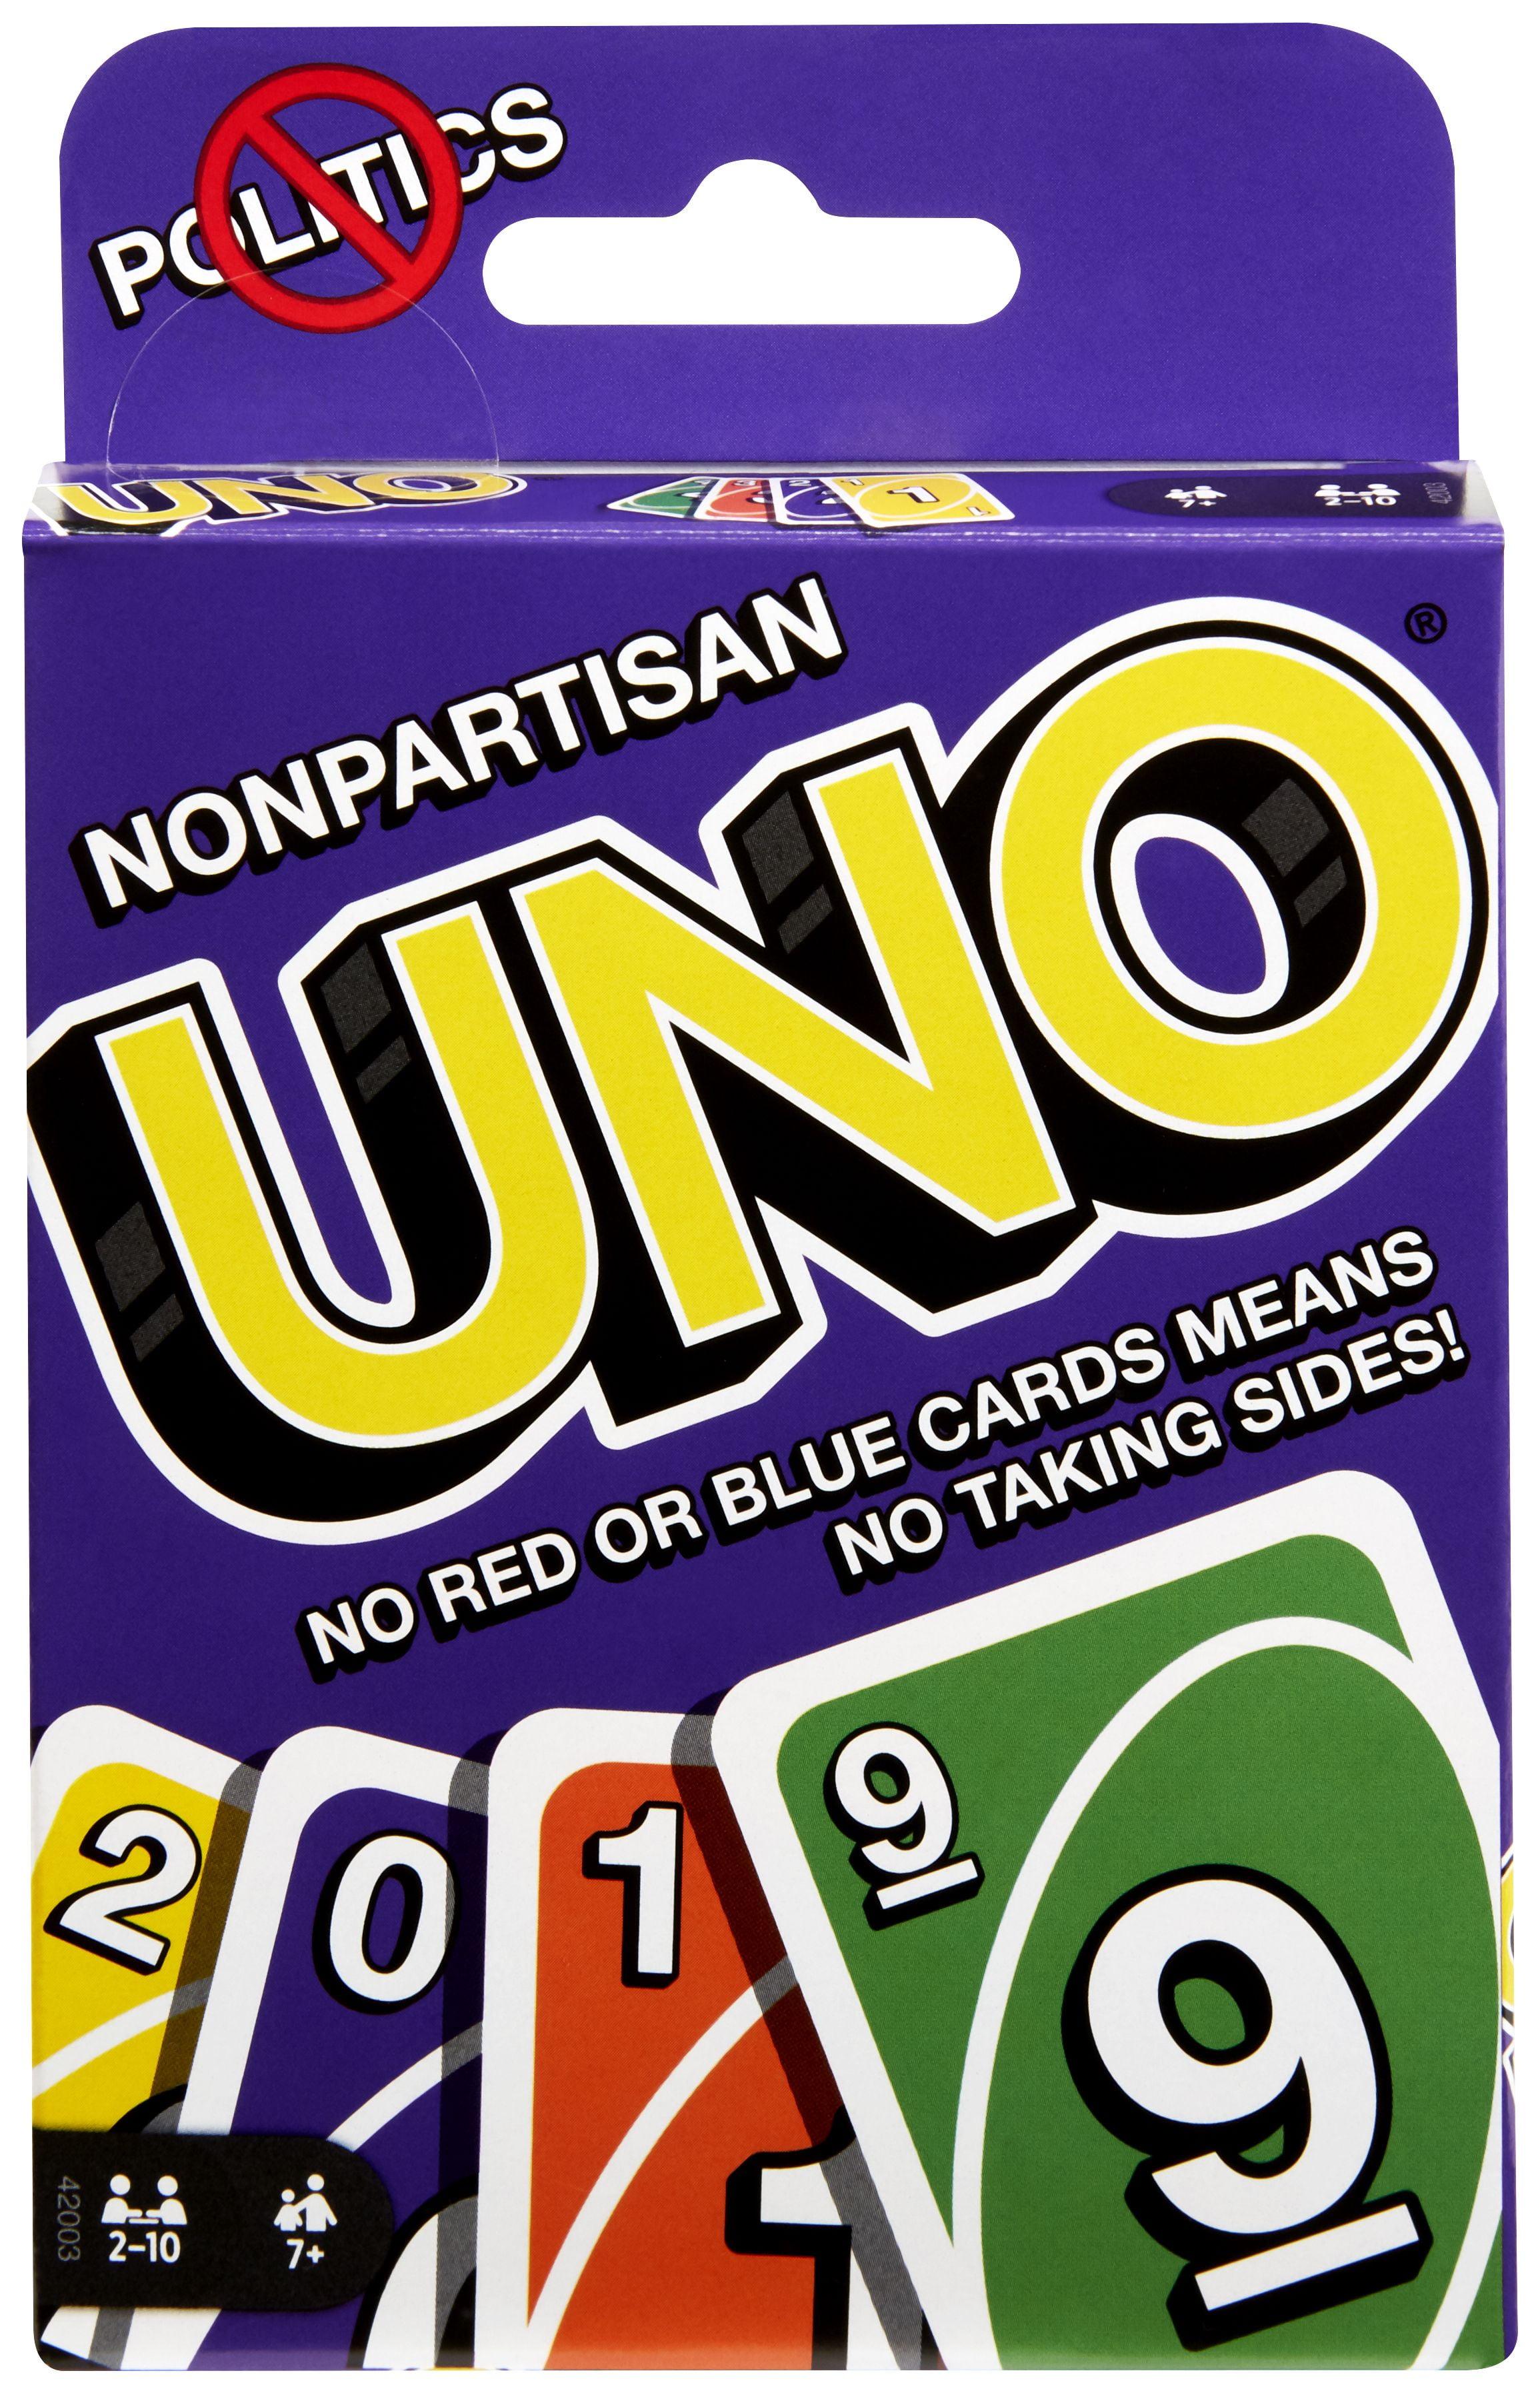 Mini Uno Card Game Party Favor Travel Camp Craft Complete